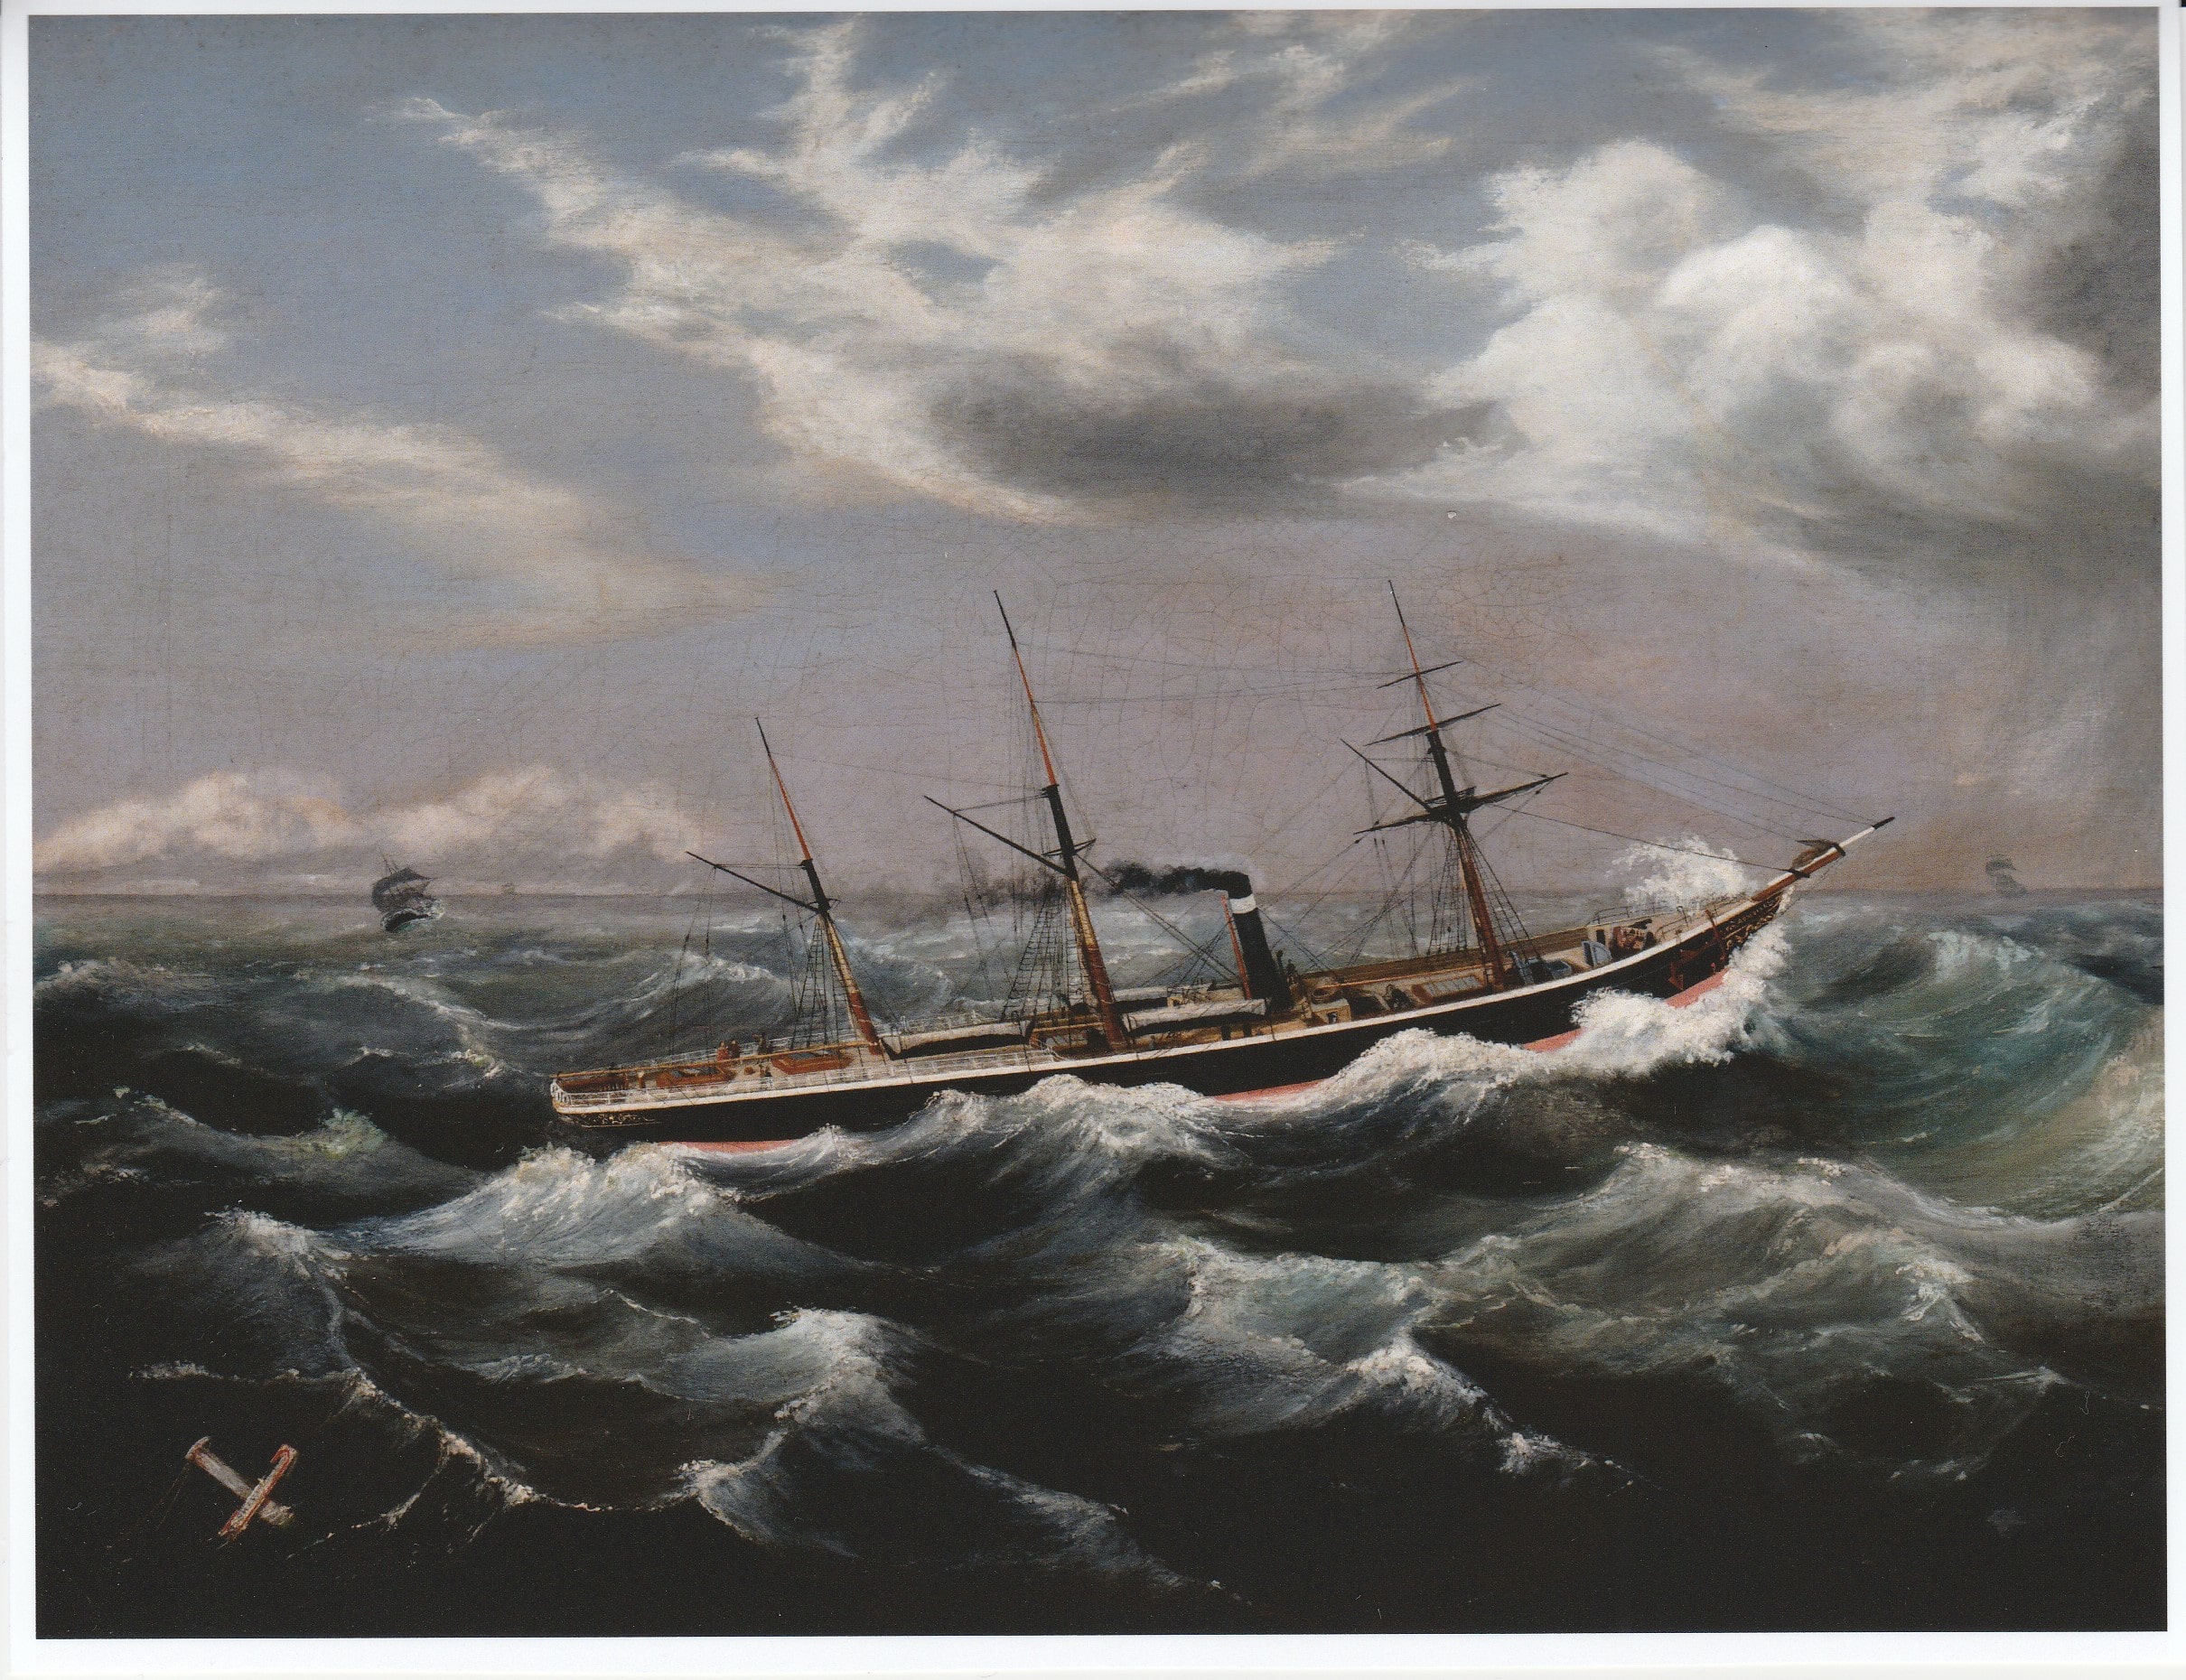 Read more about the article On this day 164 years ago, the SS Admella was wrecked on Carpenters Reef